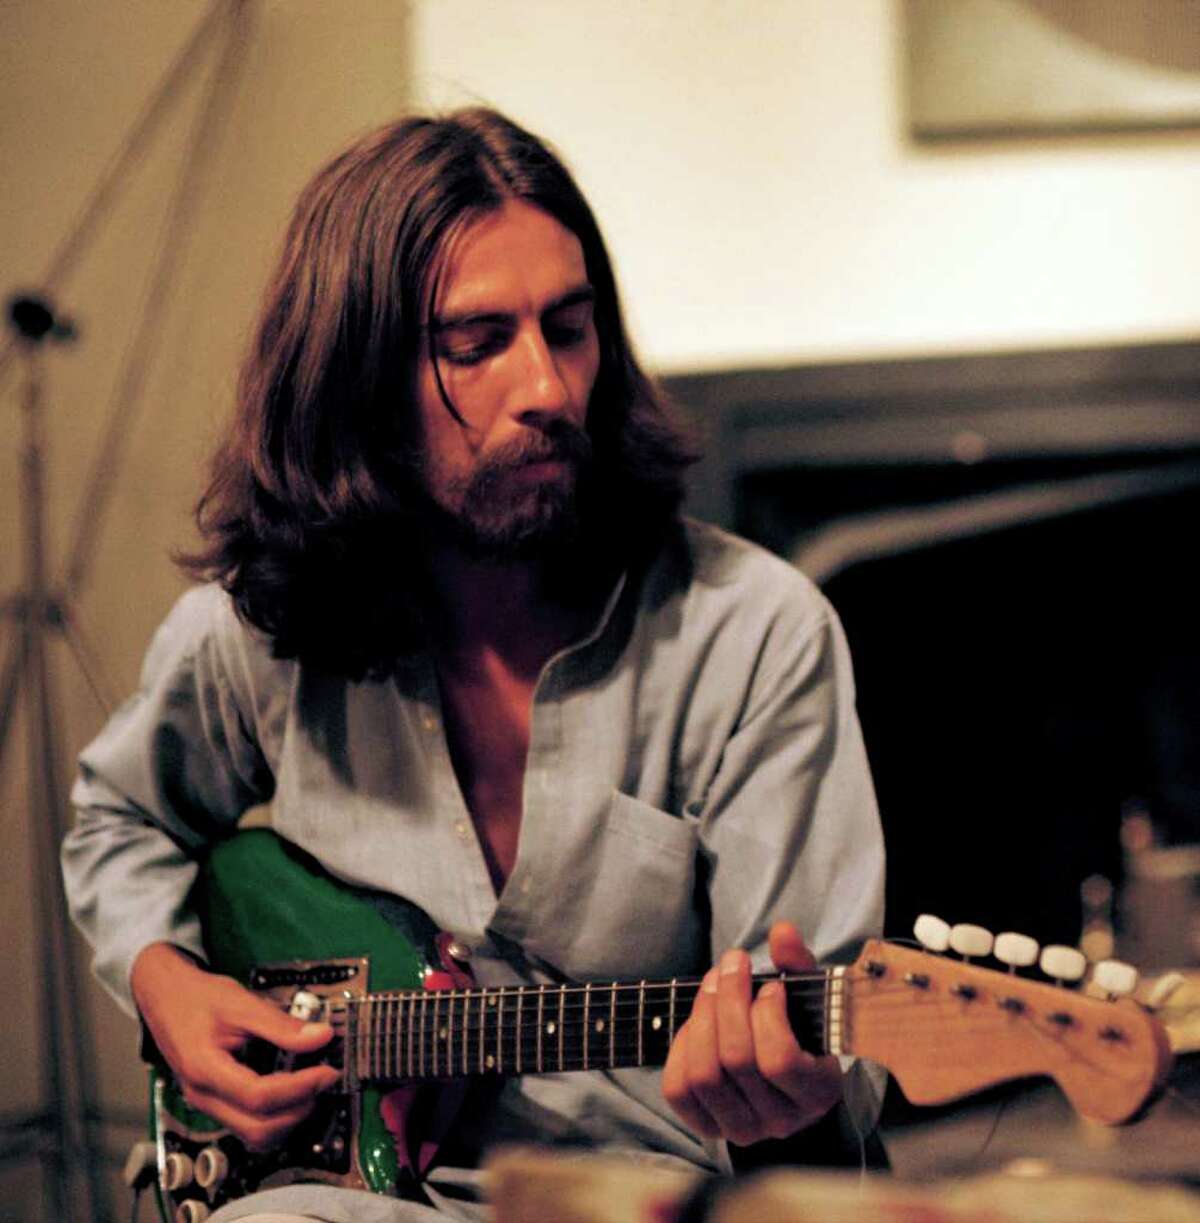 Apple Corps Limited | courtesy of HBO WHILE MY GUITAR GENTLY WEEPS: George Harrison's disdain for fanaticism and worldly trappings are touched on in the Martin Scorsese documentary George Harrison: Living in the Material World.